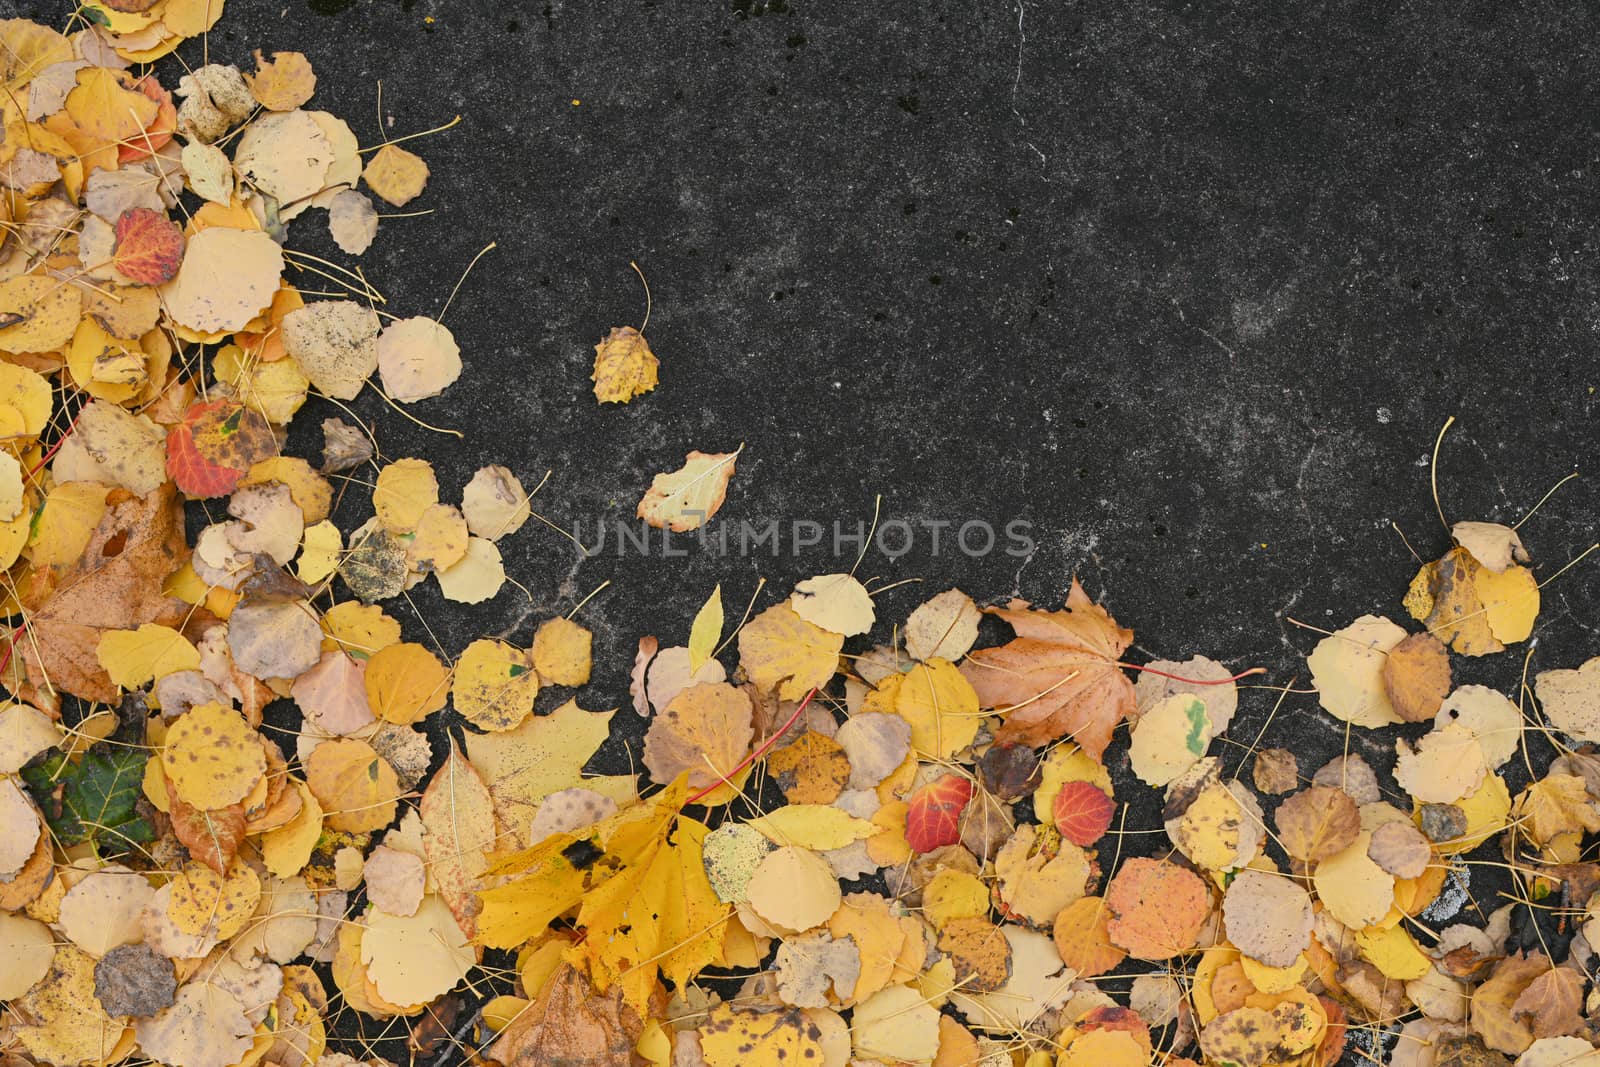 fallen leaves on the concrete pavement In autumn by sashokddt